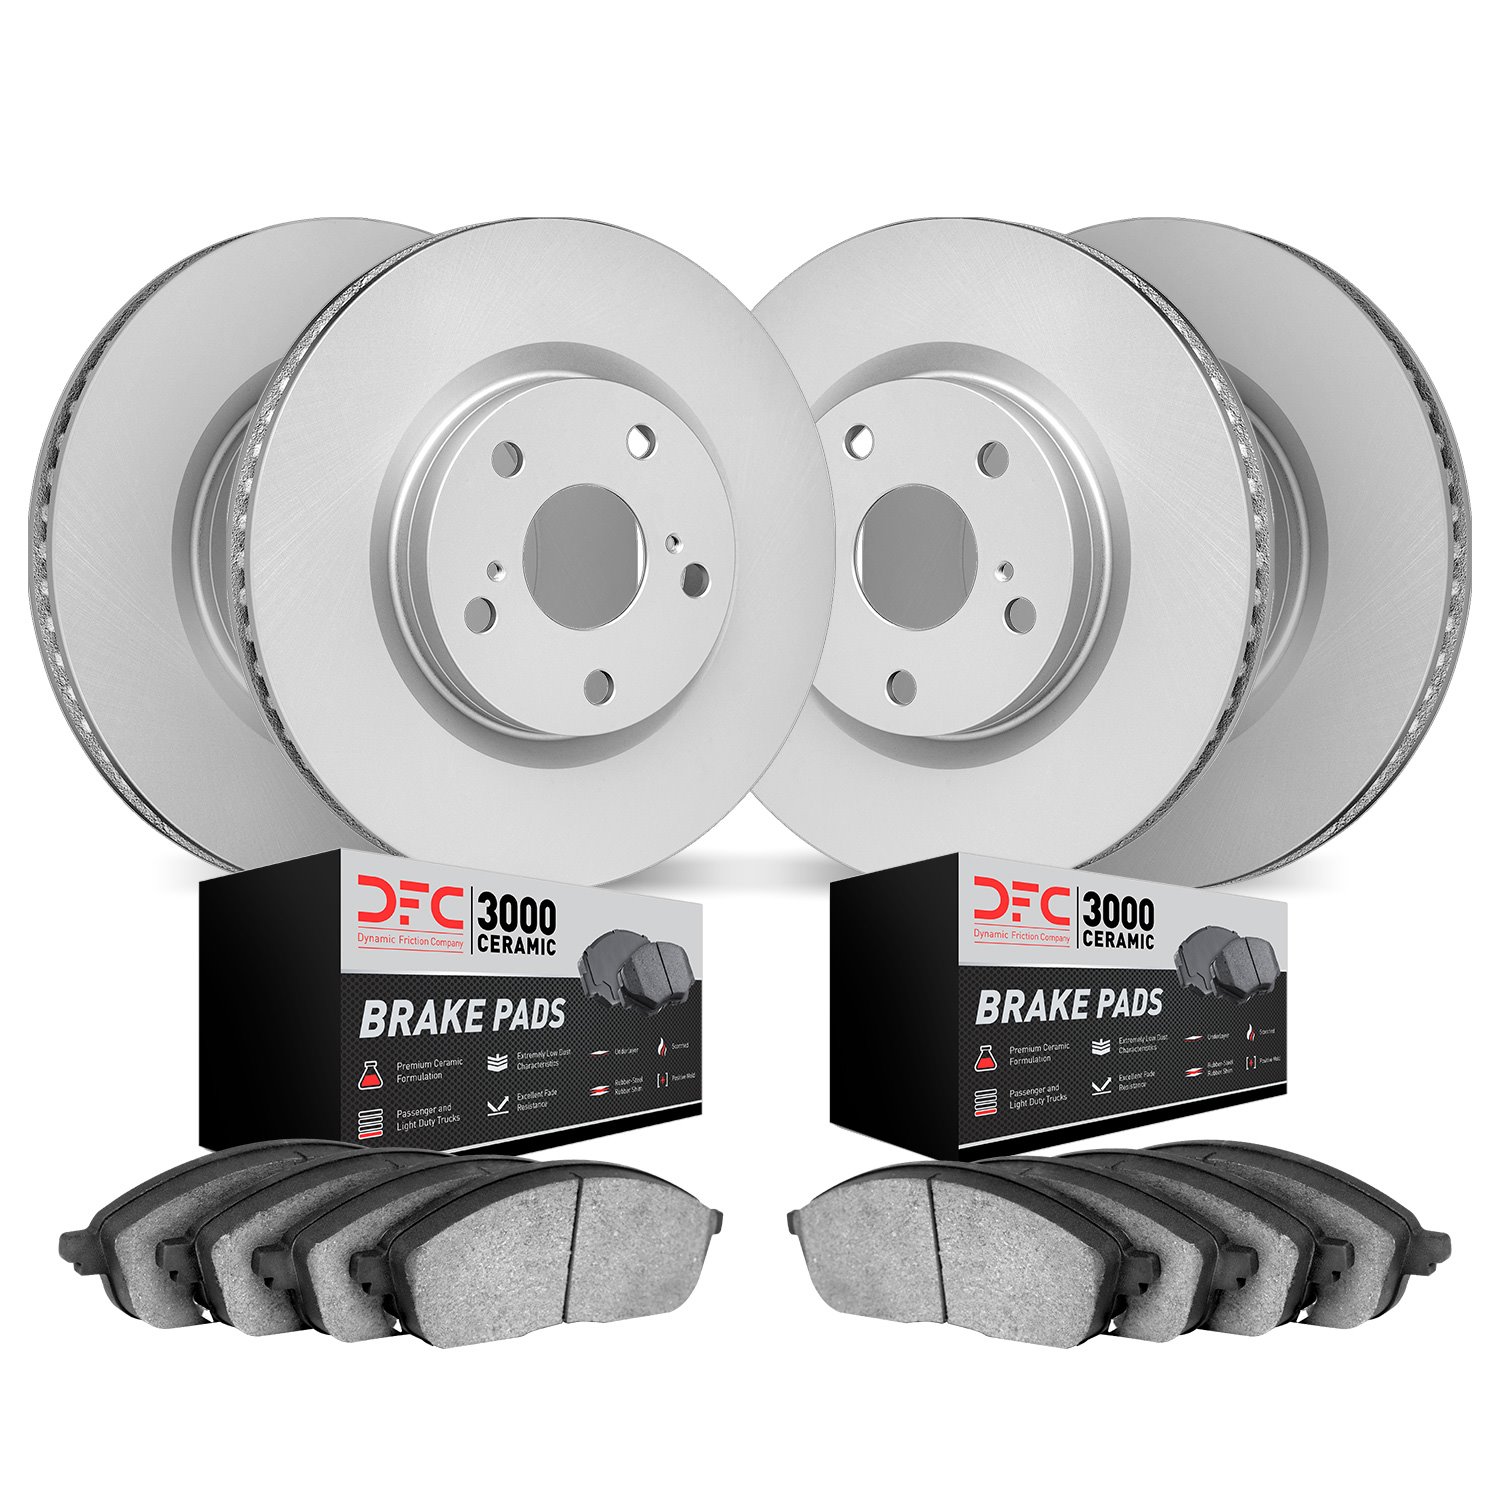 4304-02002 Geospec Brake Rotors with 3000-Series Ceramic Brake Pads Kit, 1987-1989 Porsche, Position: Front and Rear